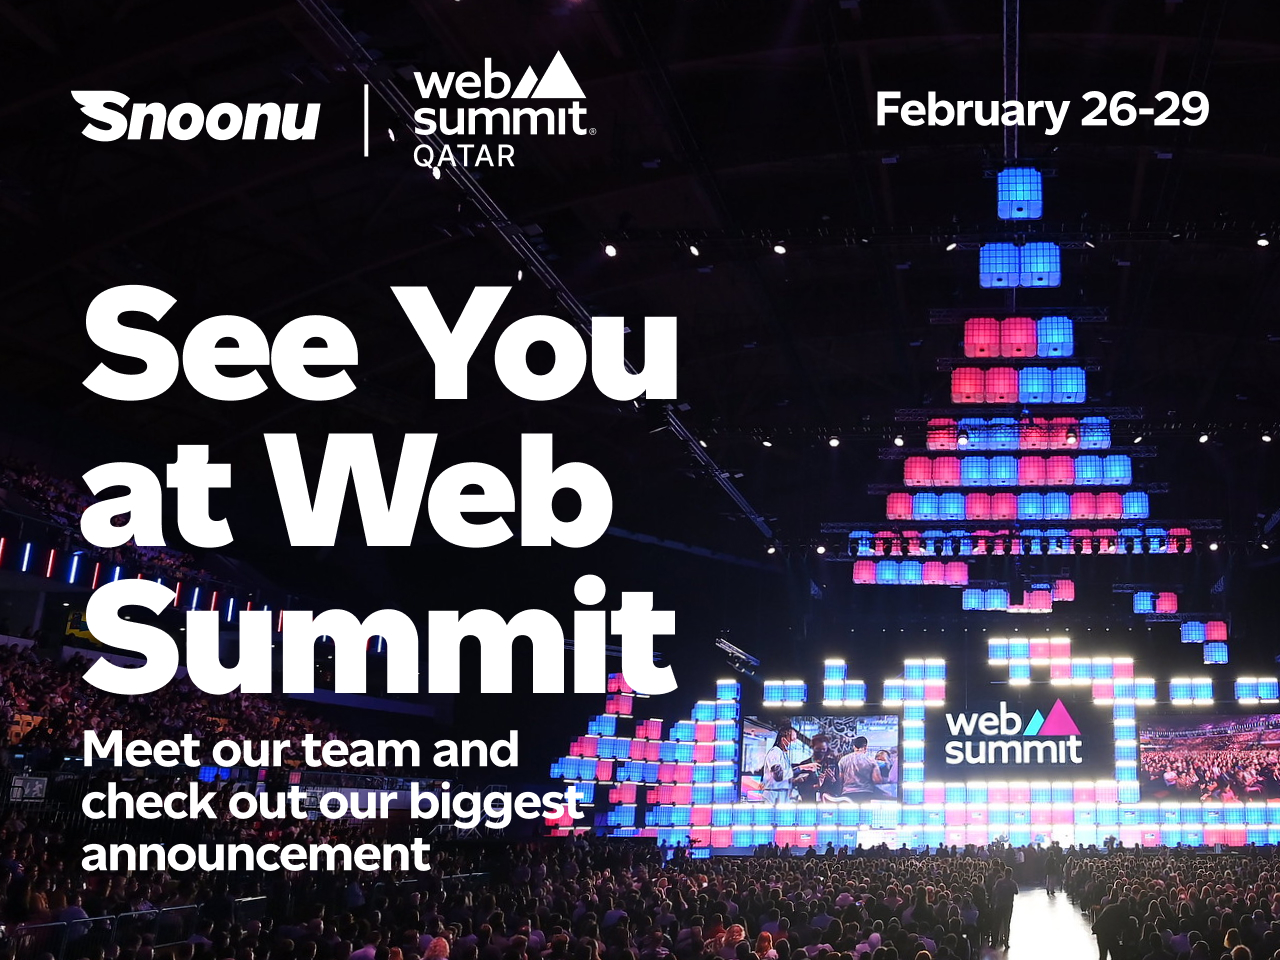 Snoonu, Qatar’s leading tech company, showcases national tech leaders at Web Summit with over 80 Engineers and product Experts across more than 7 workshops